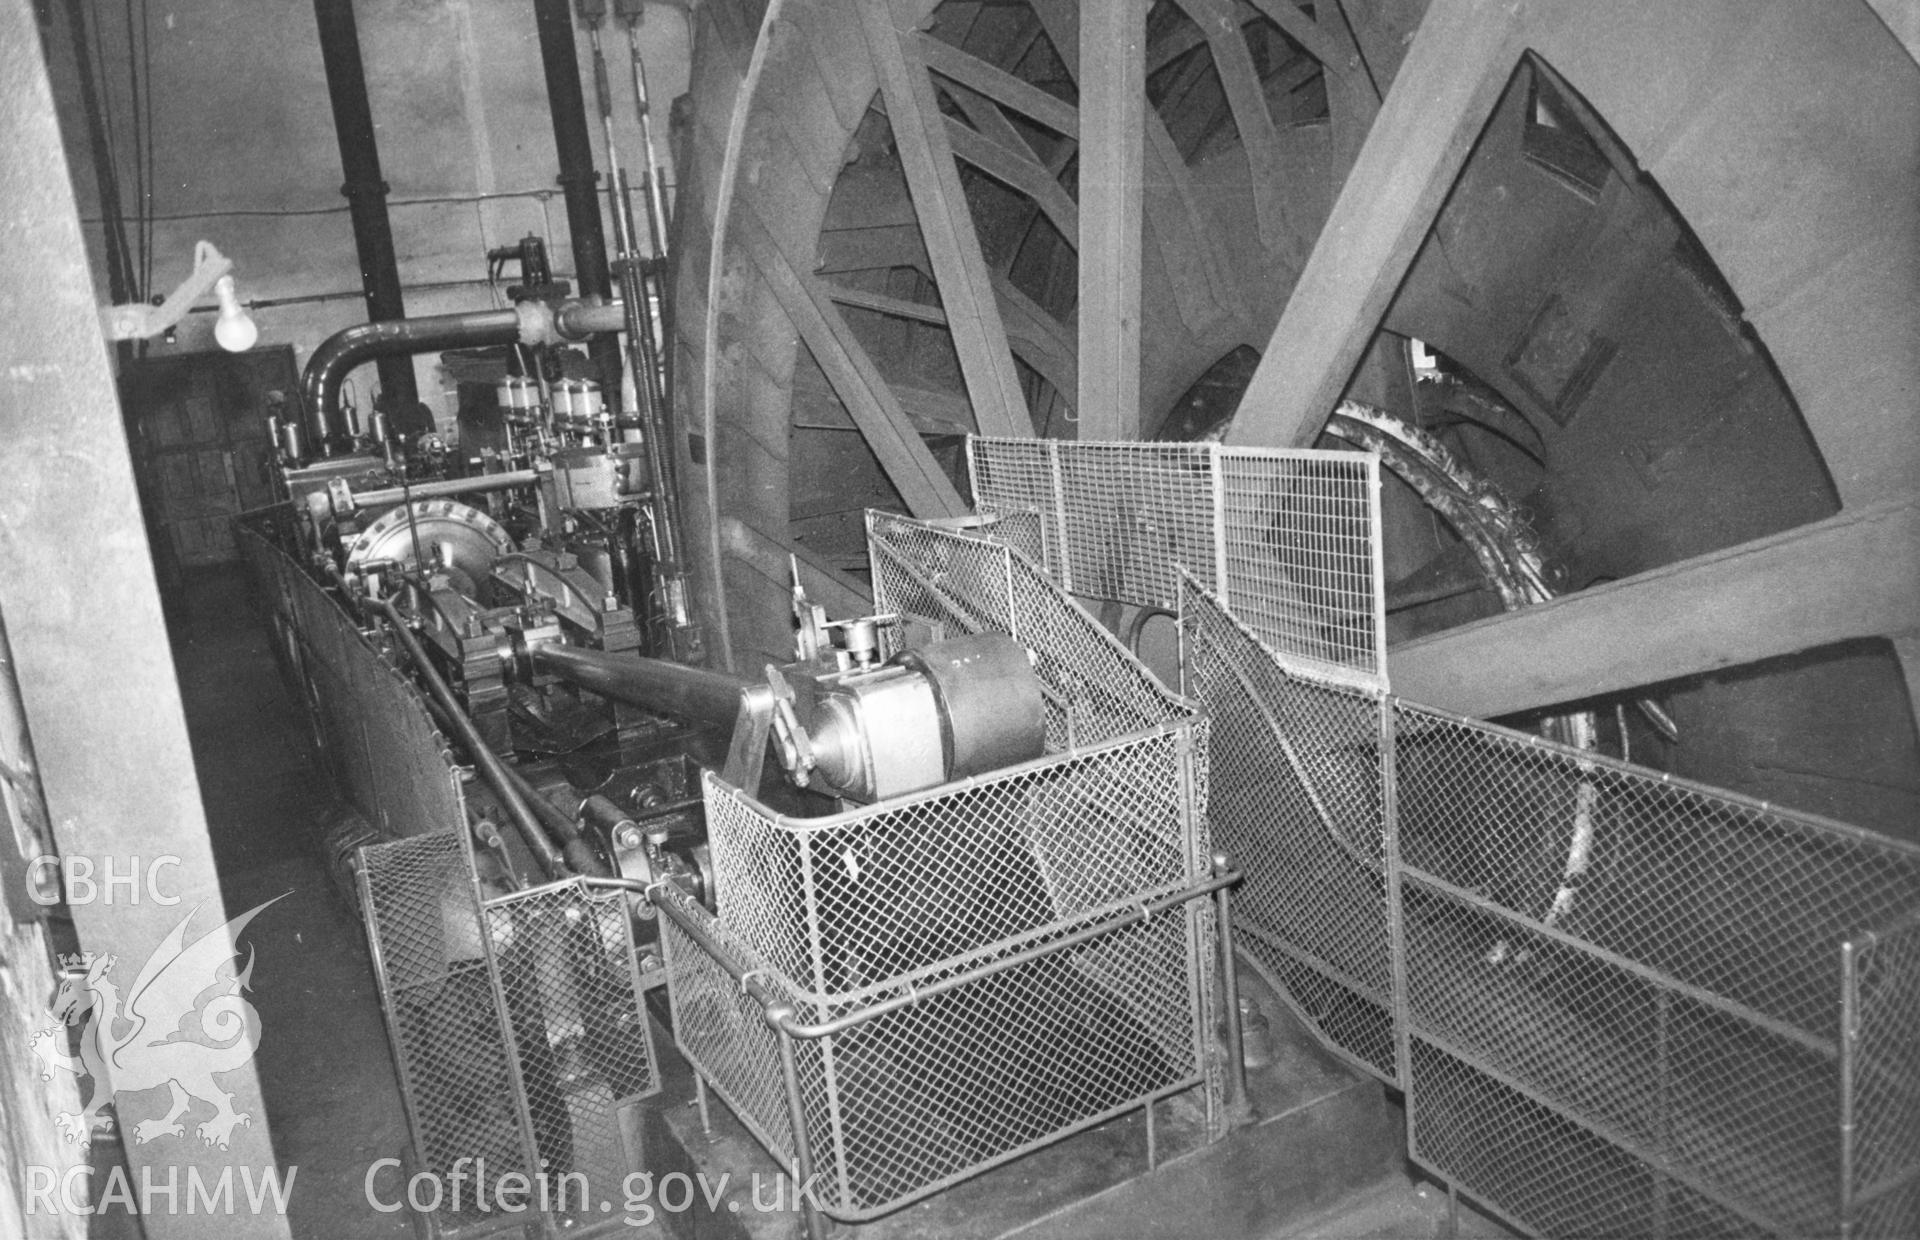 View of Thornwill and Wareham tandem compound winding engine, East Pit, Elliot Colliery